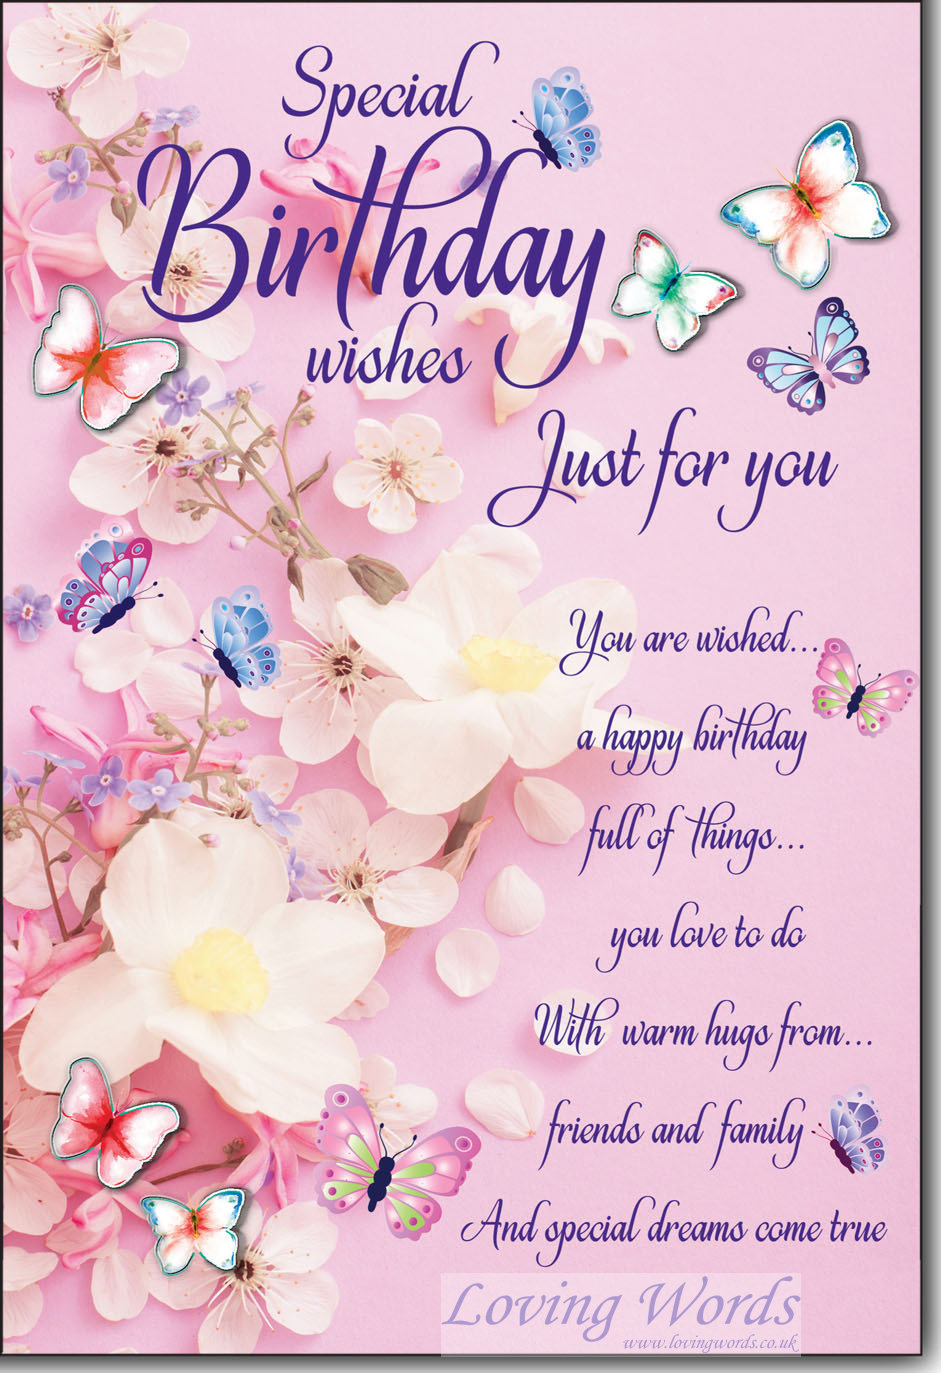 Special Birthday Wishes | Greeting Cards by Loving Words